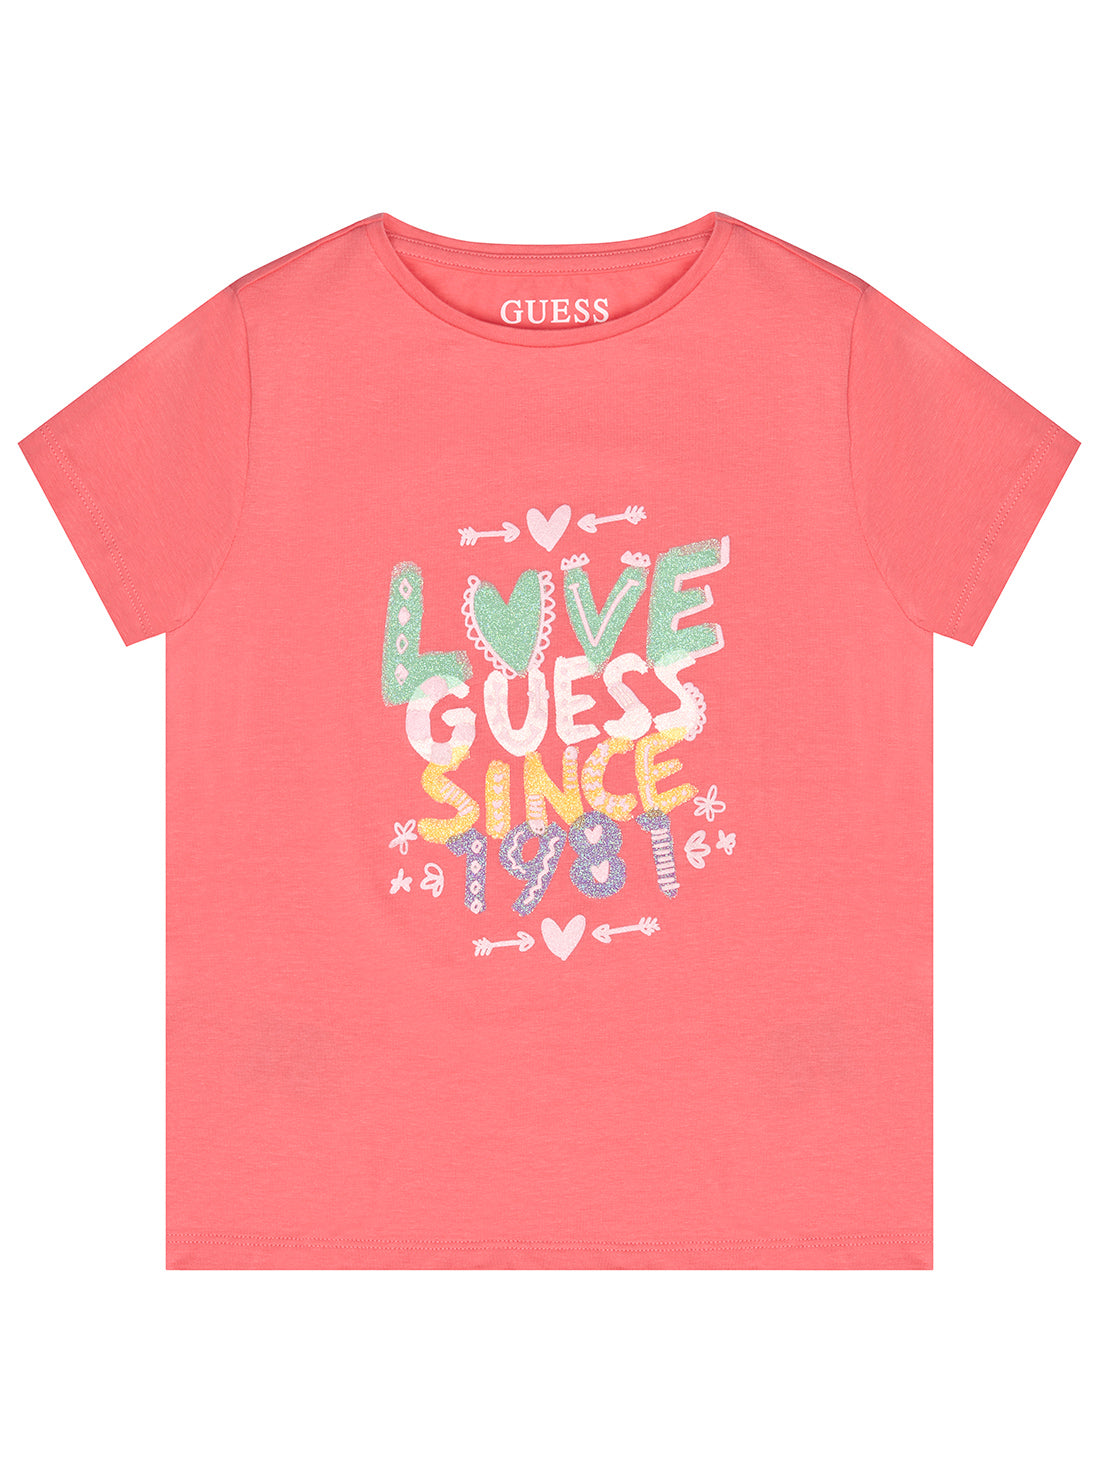 Girl's Coral Pink Glitter Logo T-Shirt front view